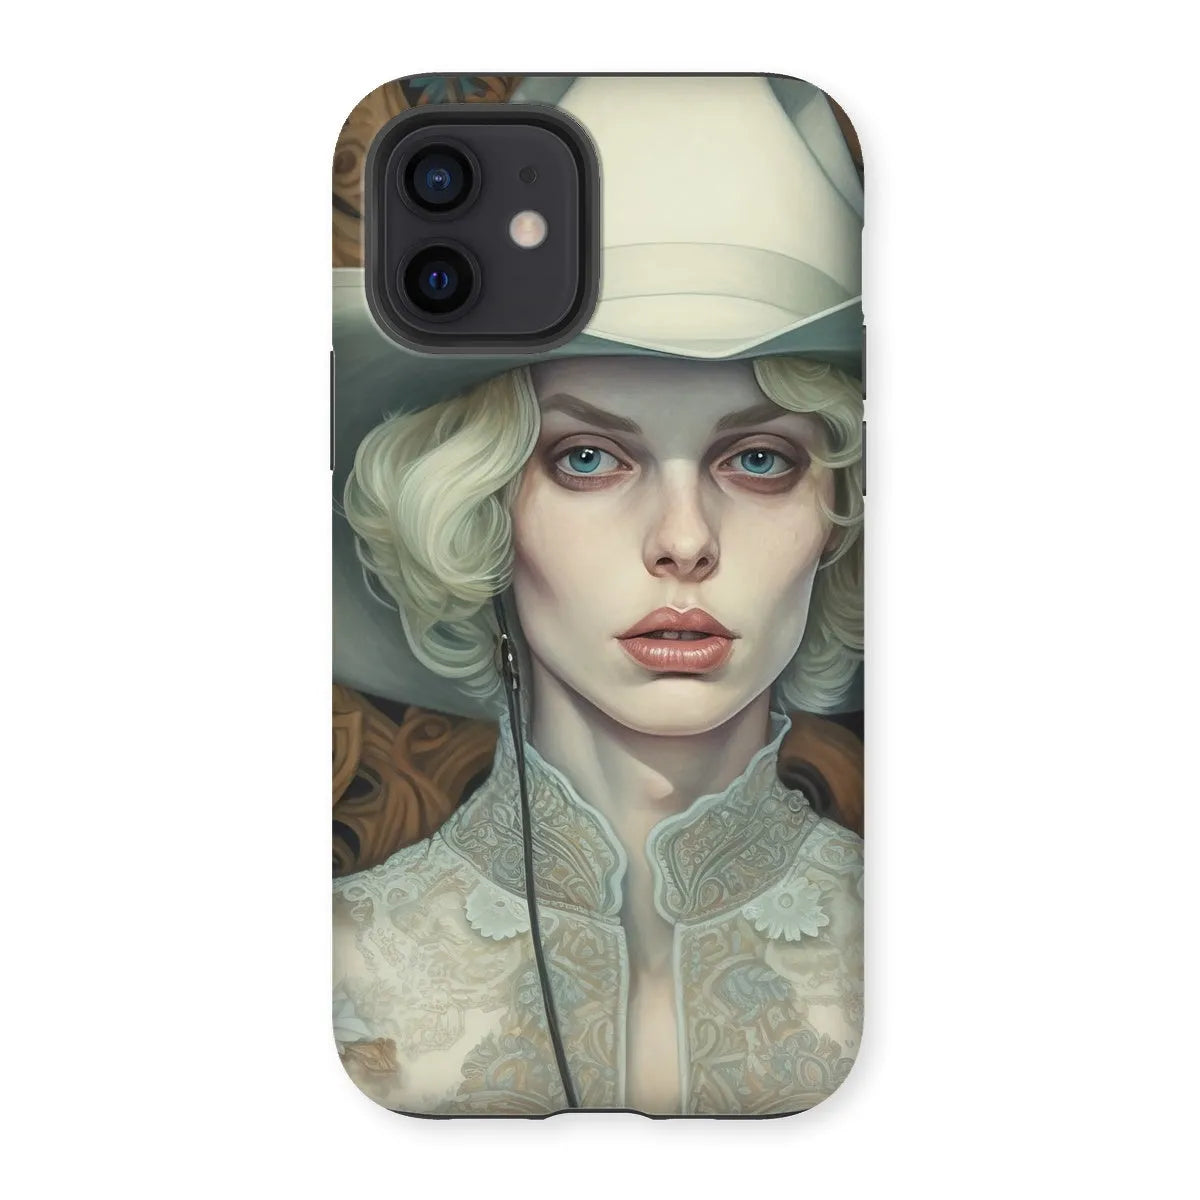 Winnie The Lesbian Cowgirl - Sapphic Art Phone Case - Iphone 12 / Matte - Mobile Phone Cases - Aesthetic Art